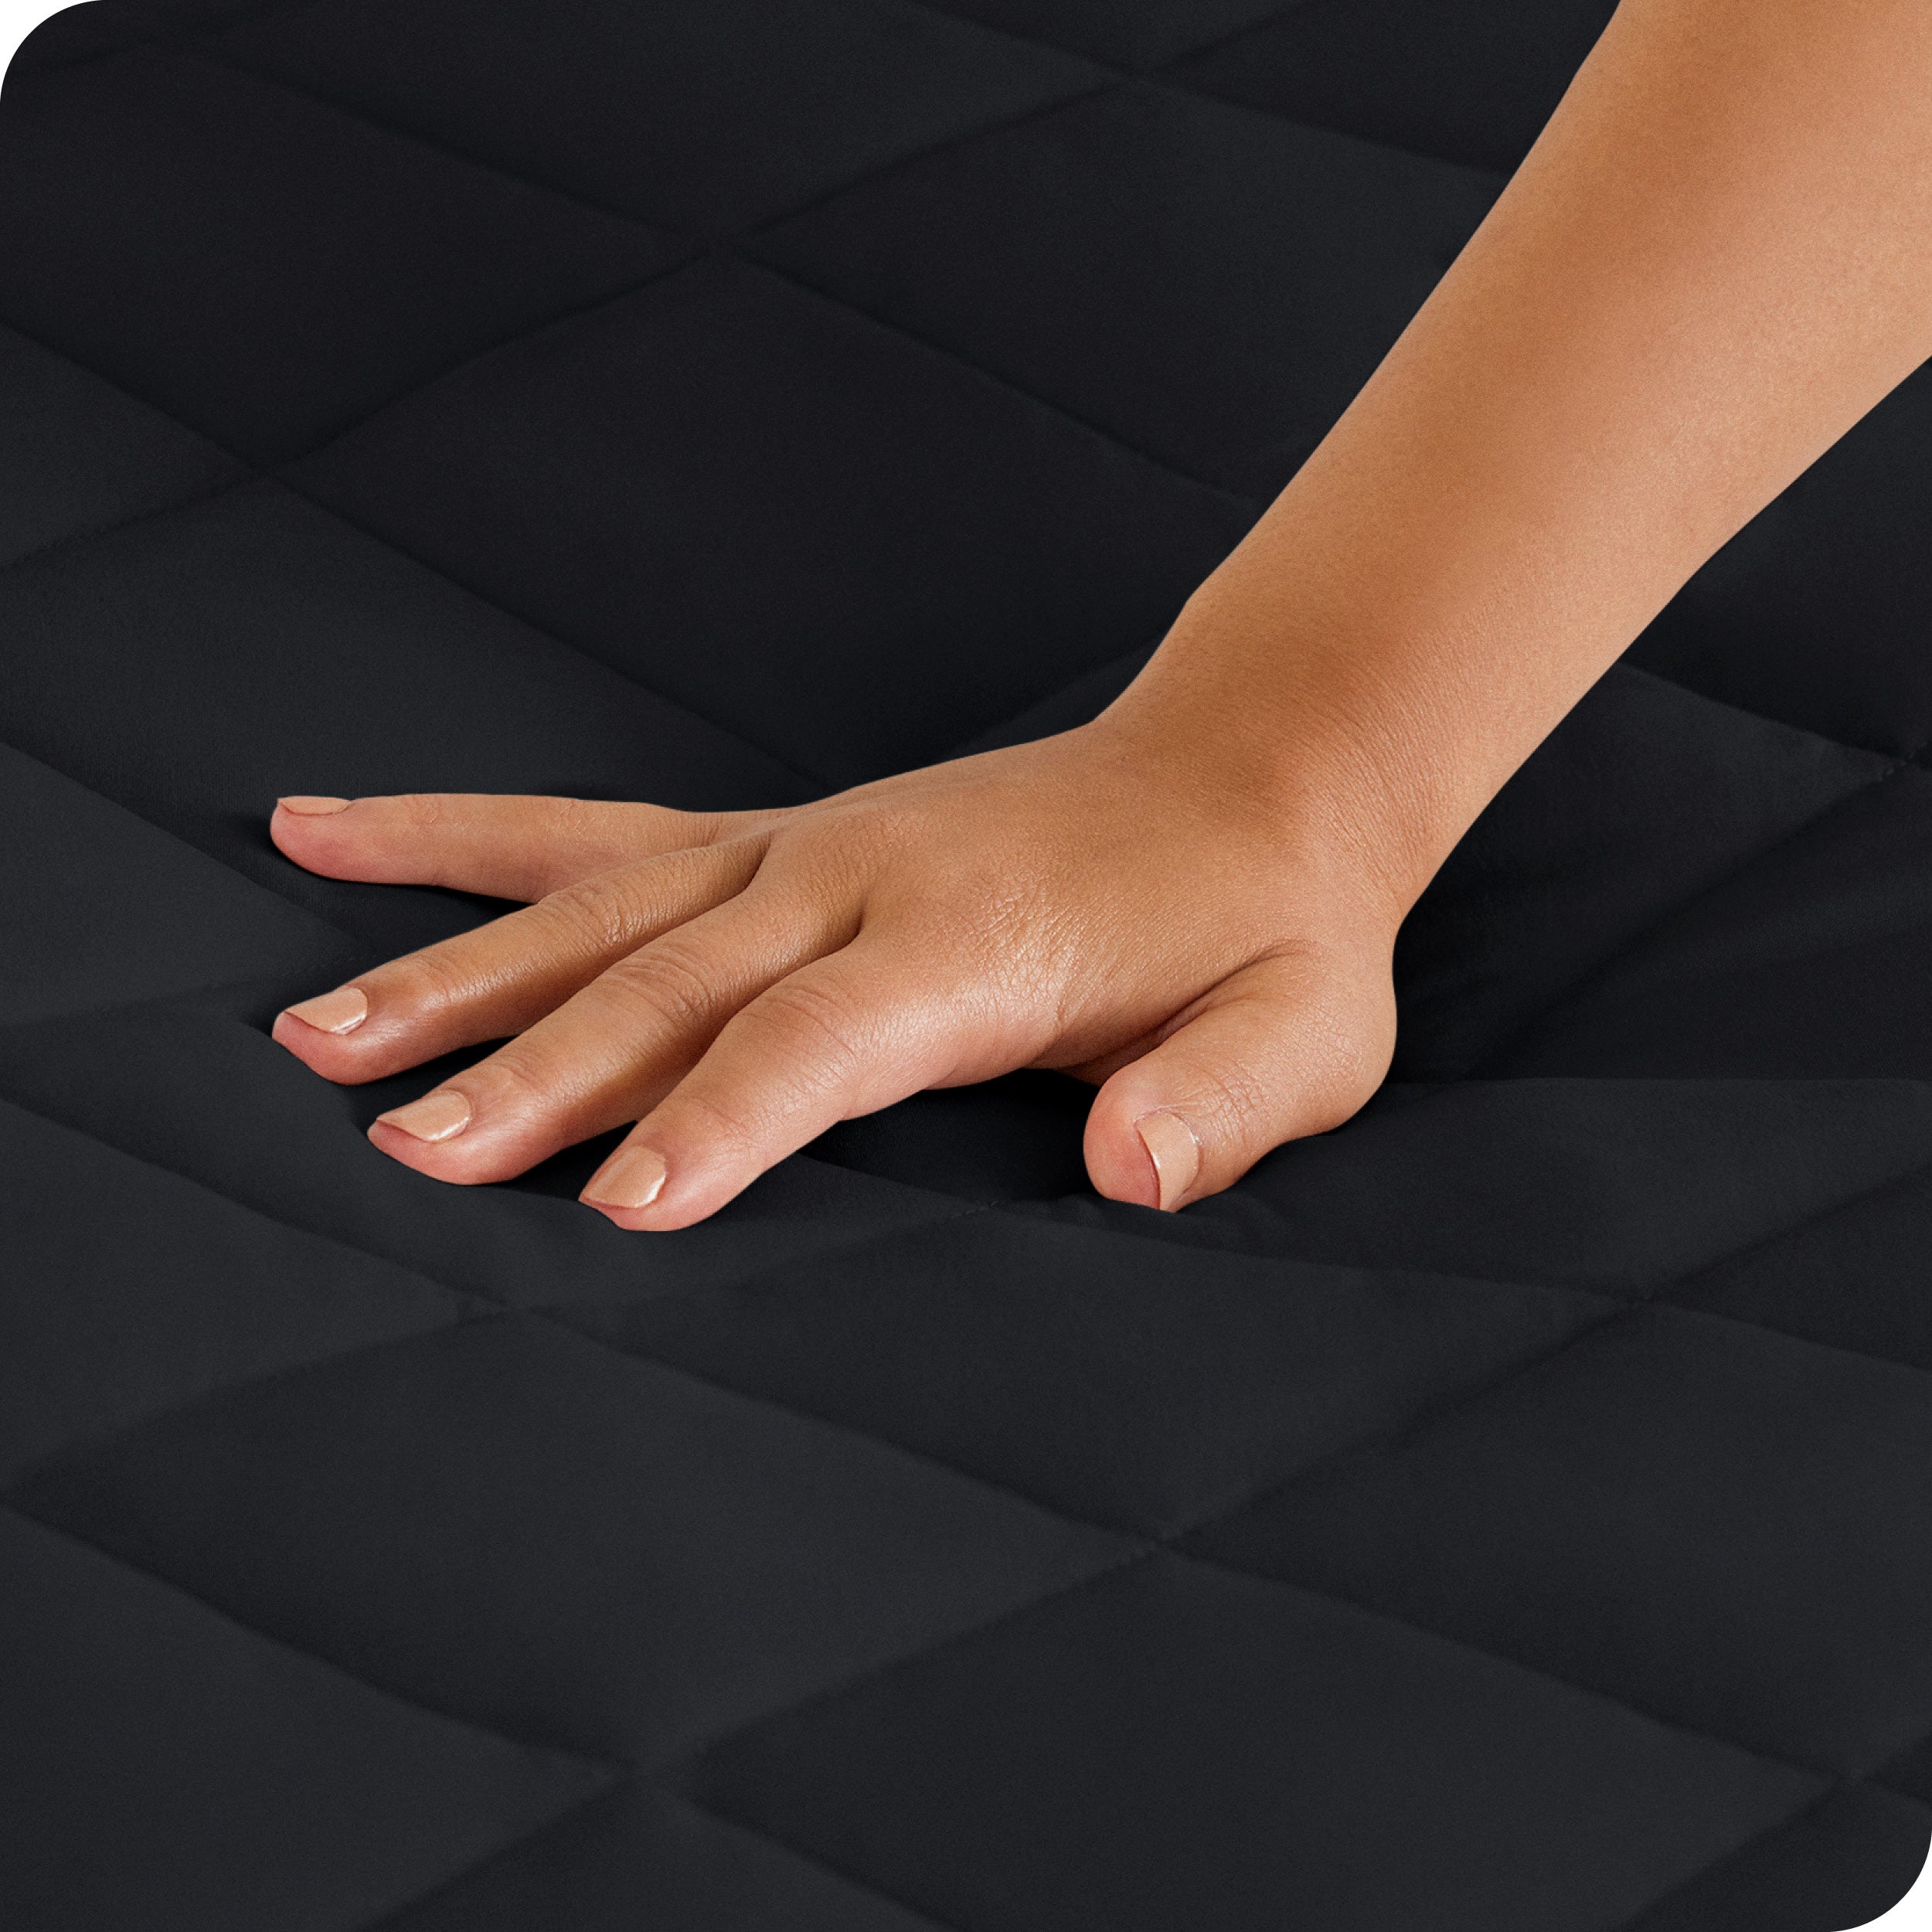 Close up of a woman's hand pressing down on a mattress pad